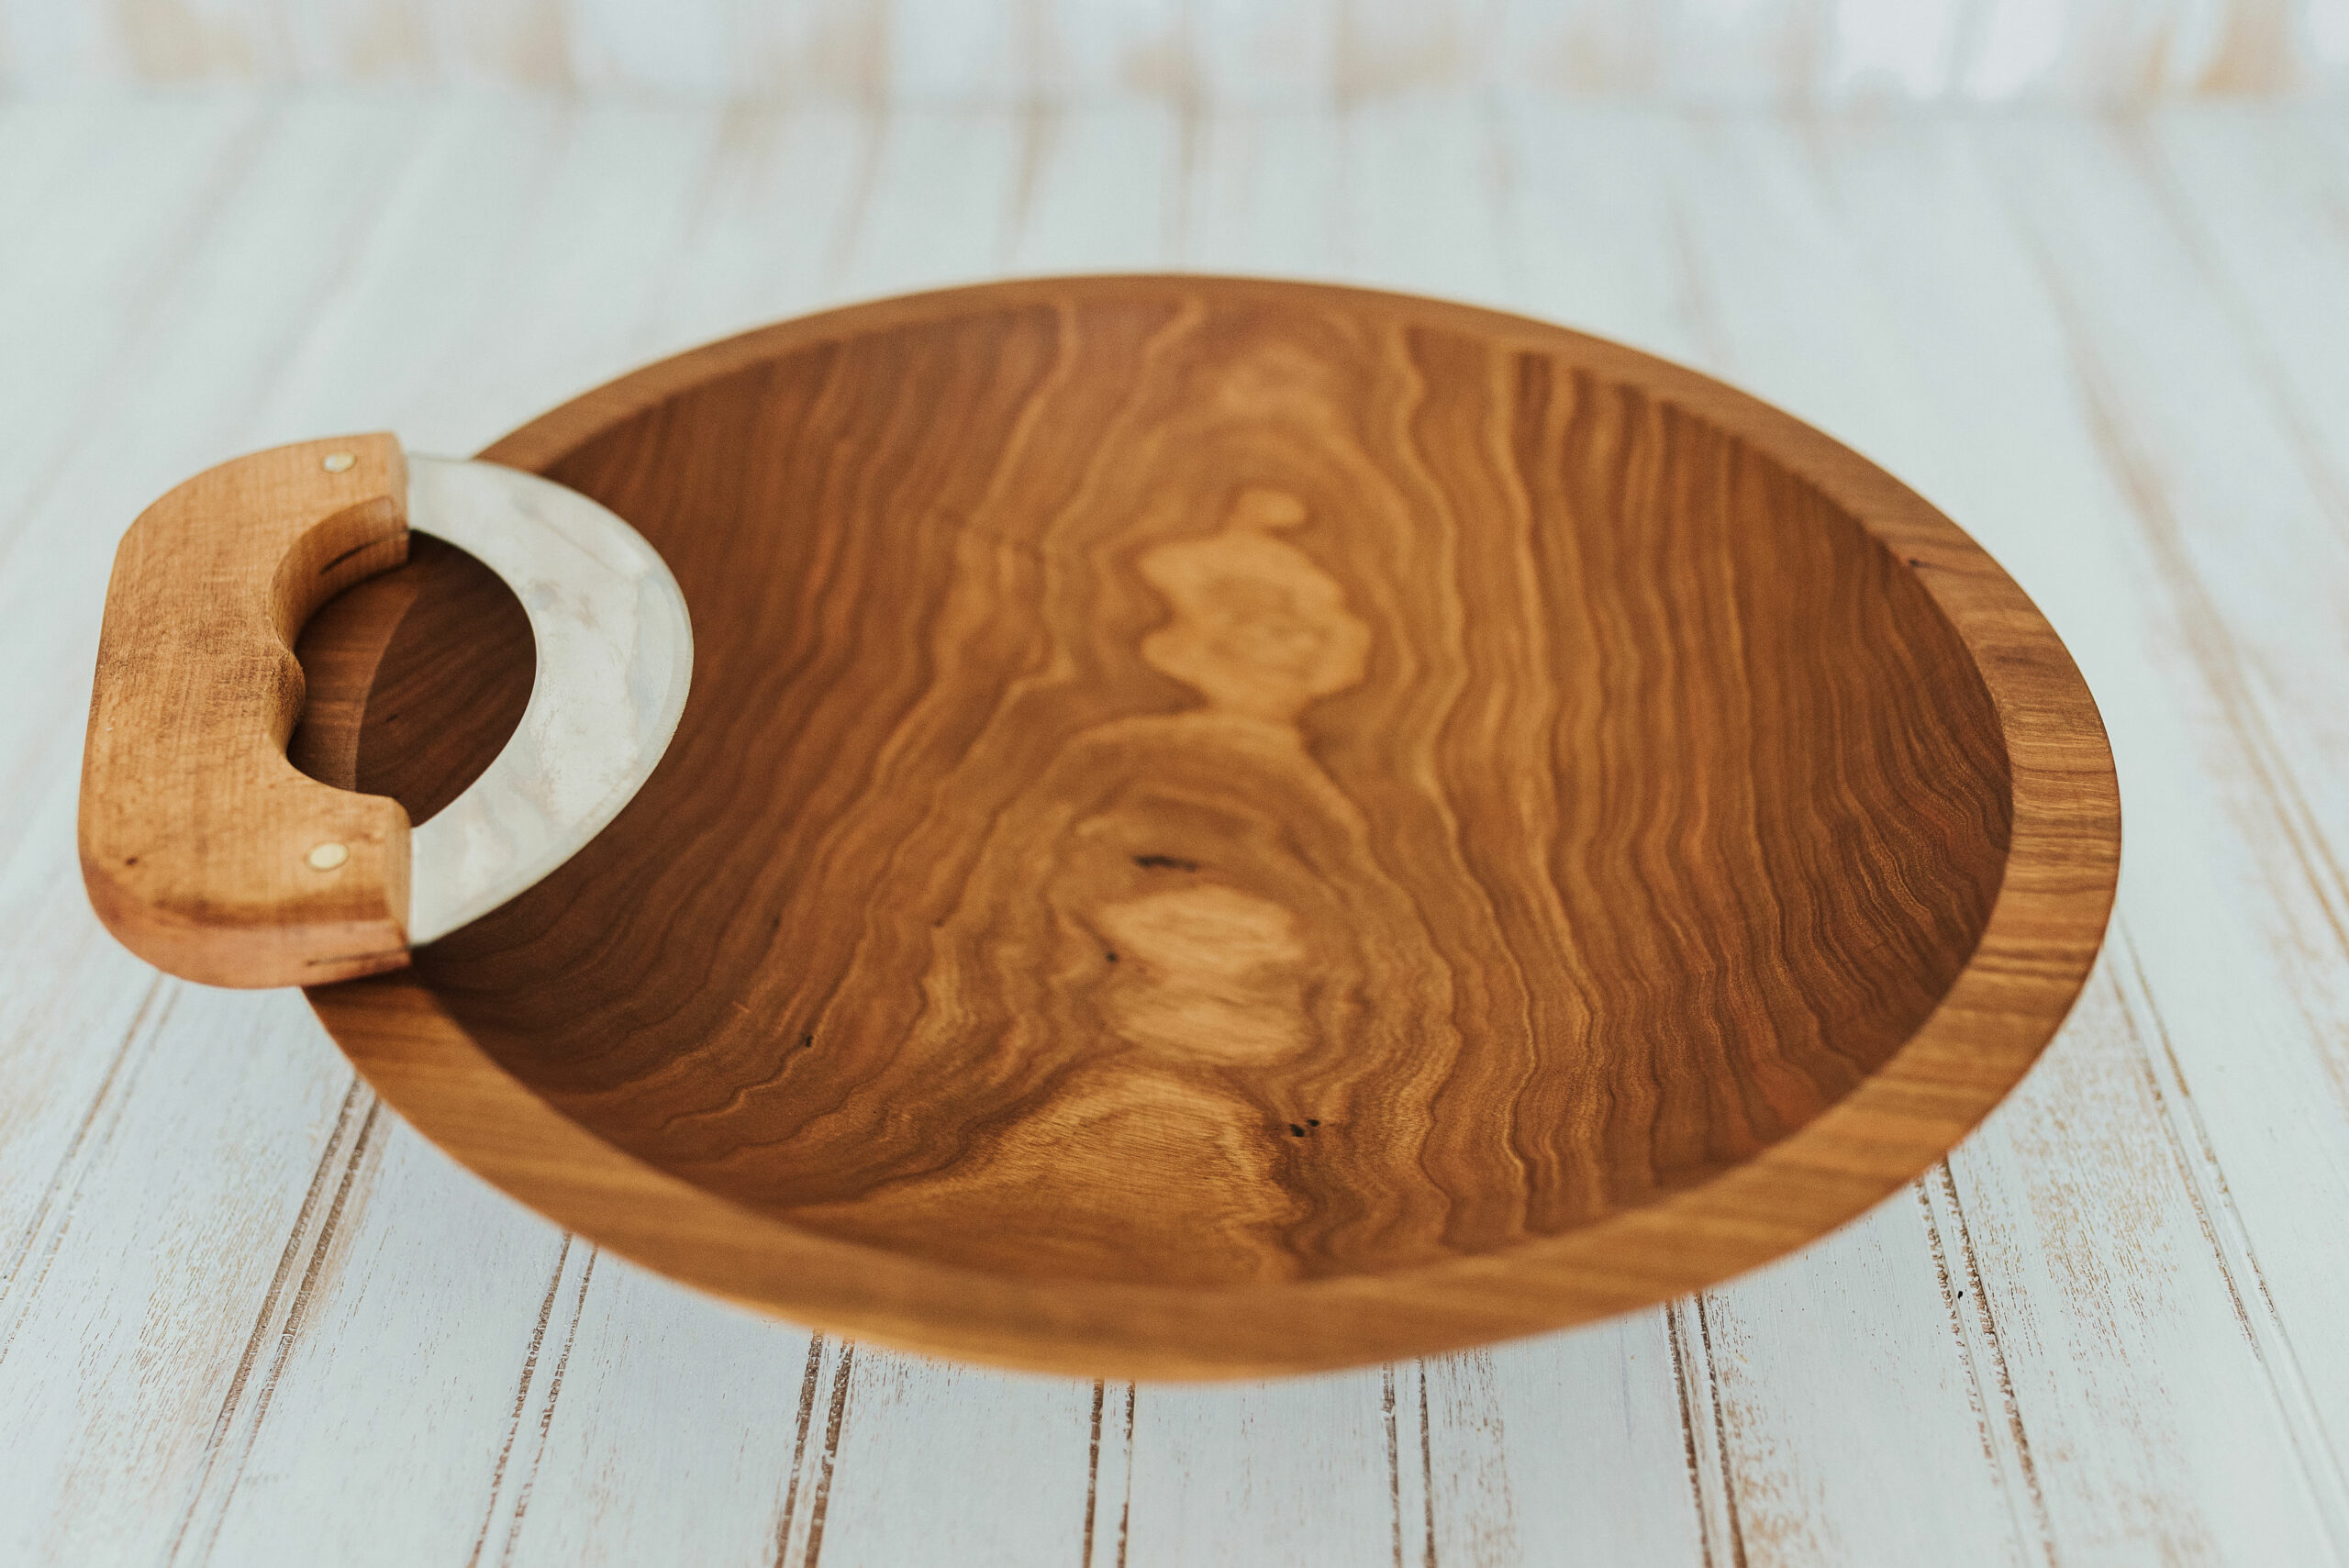 13.5-inch Large Wooden Chopping Bowl Set with Mezzaluna Knife